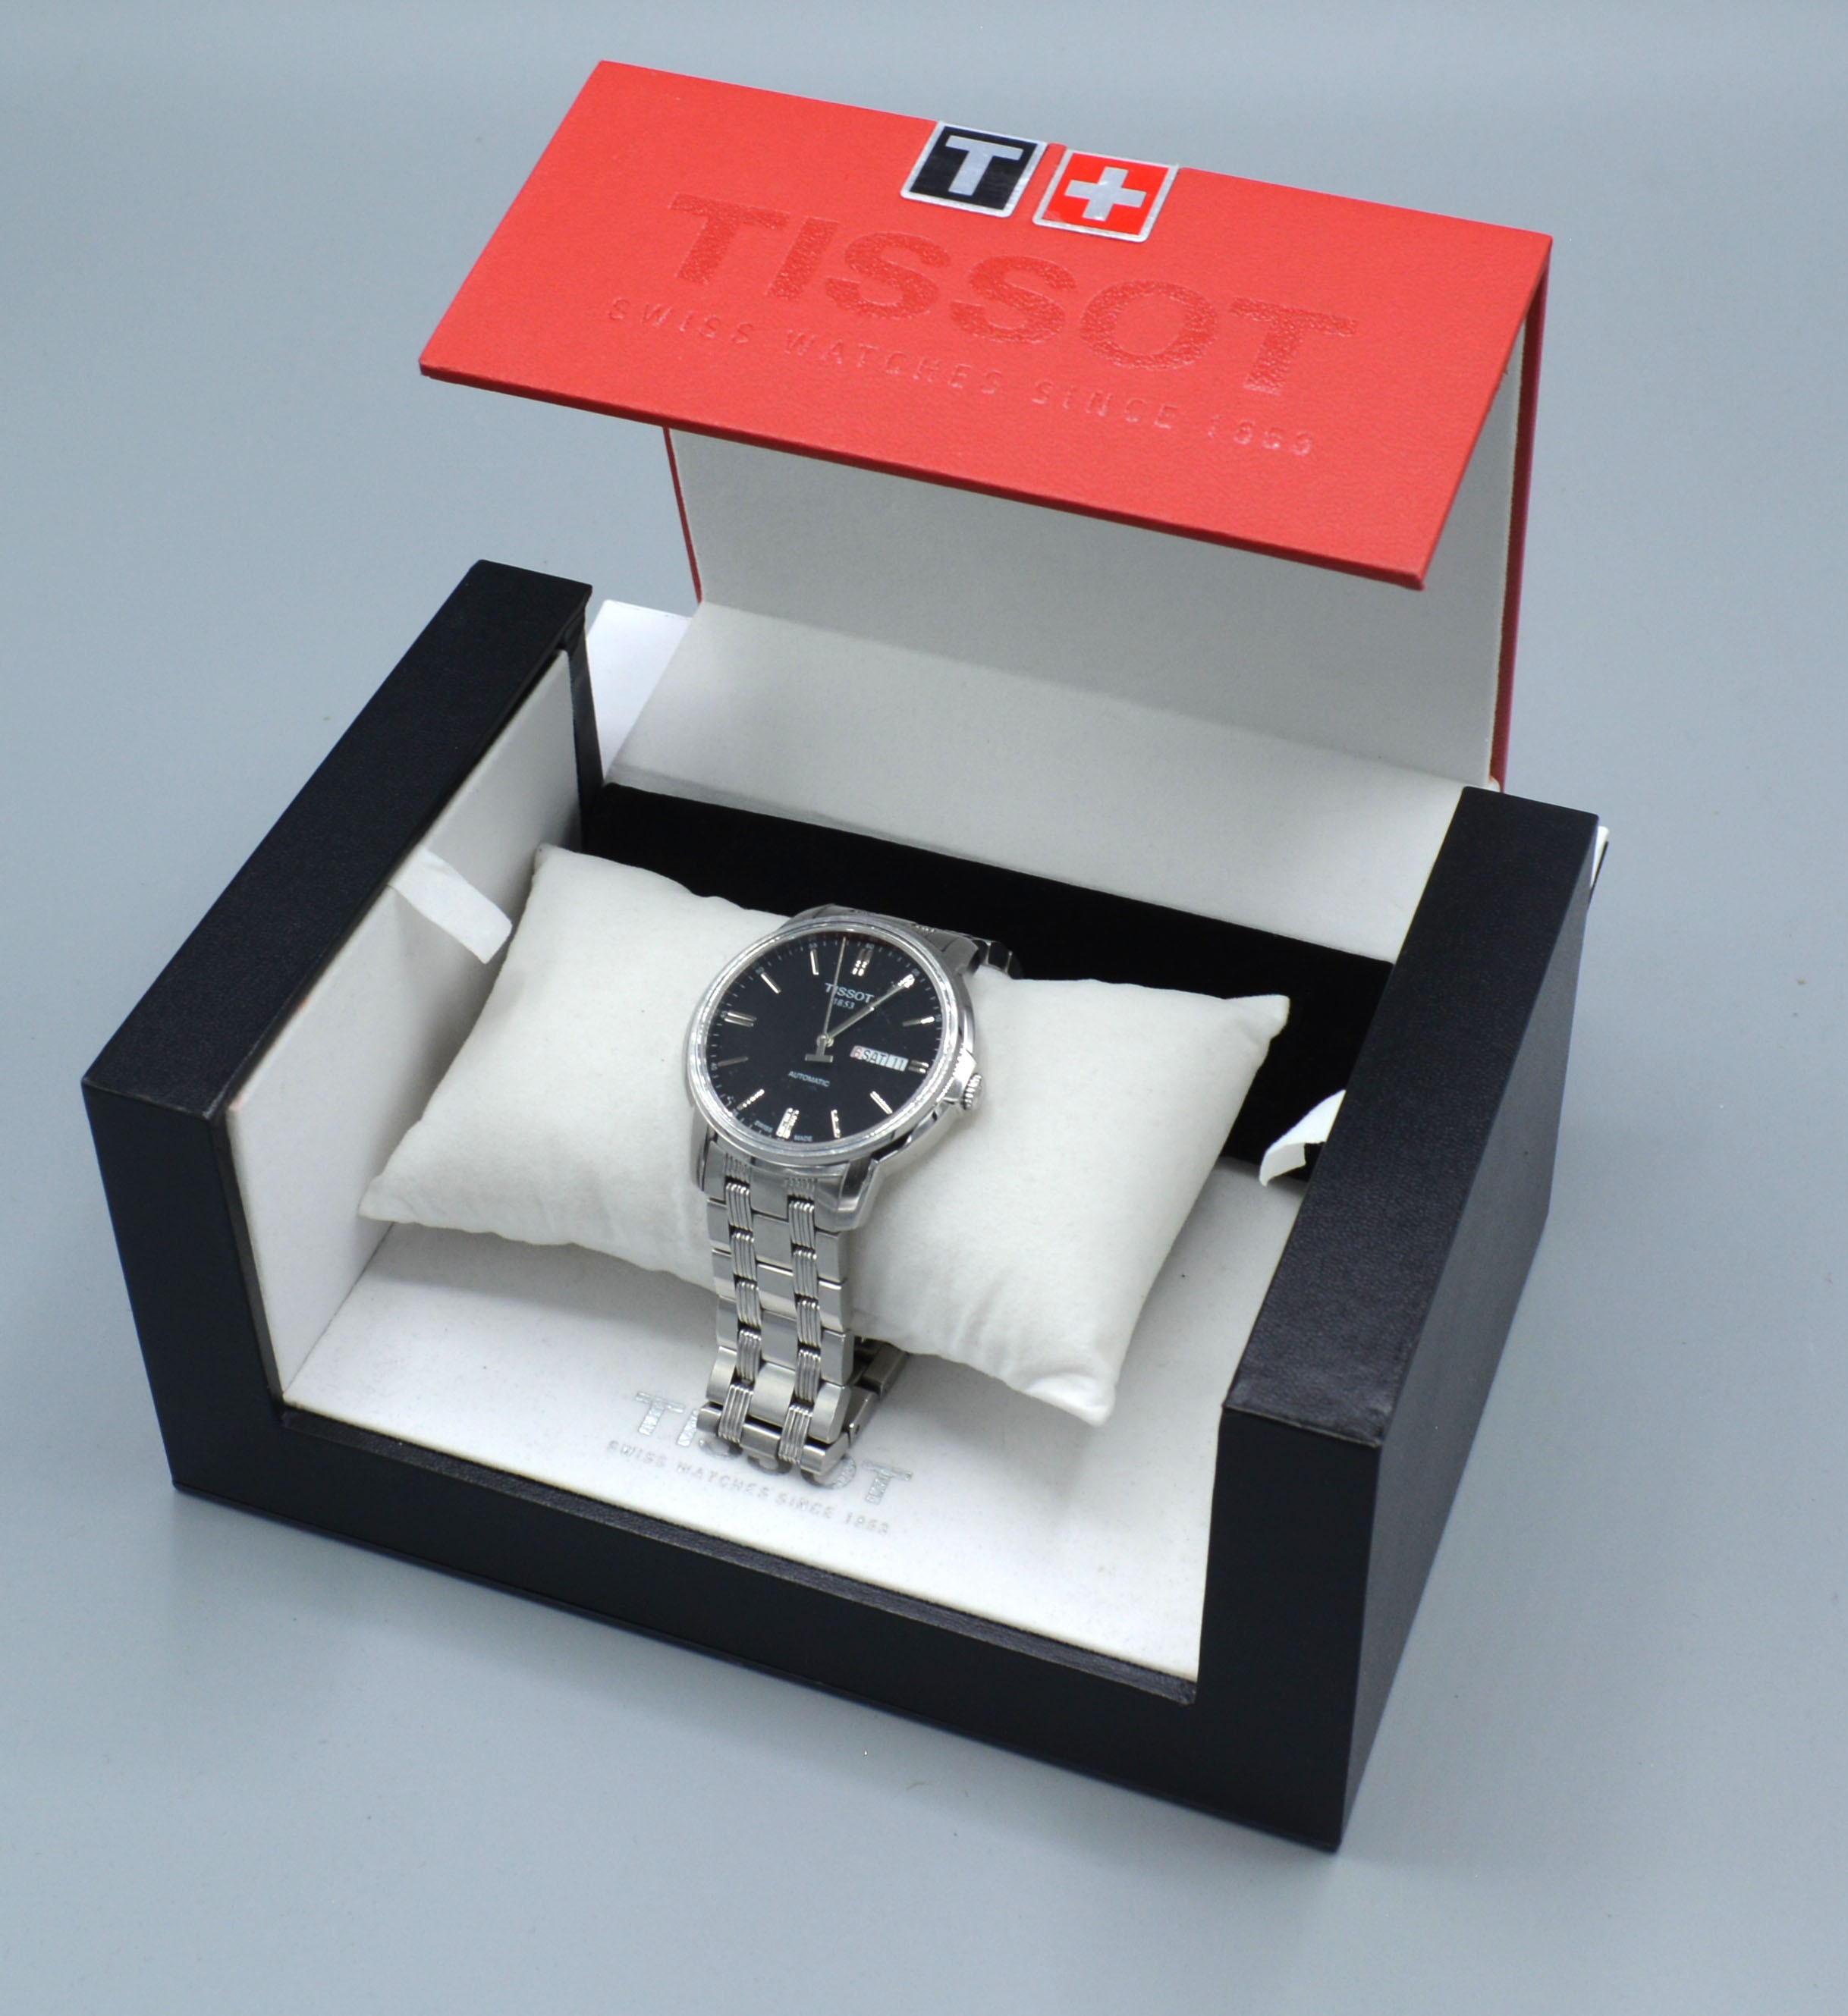 A Tissot Automatic 3T-Classic Gentleman's Stainless Steel Cased Wrist Watch with original box - Image 2 of 2